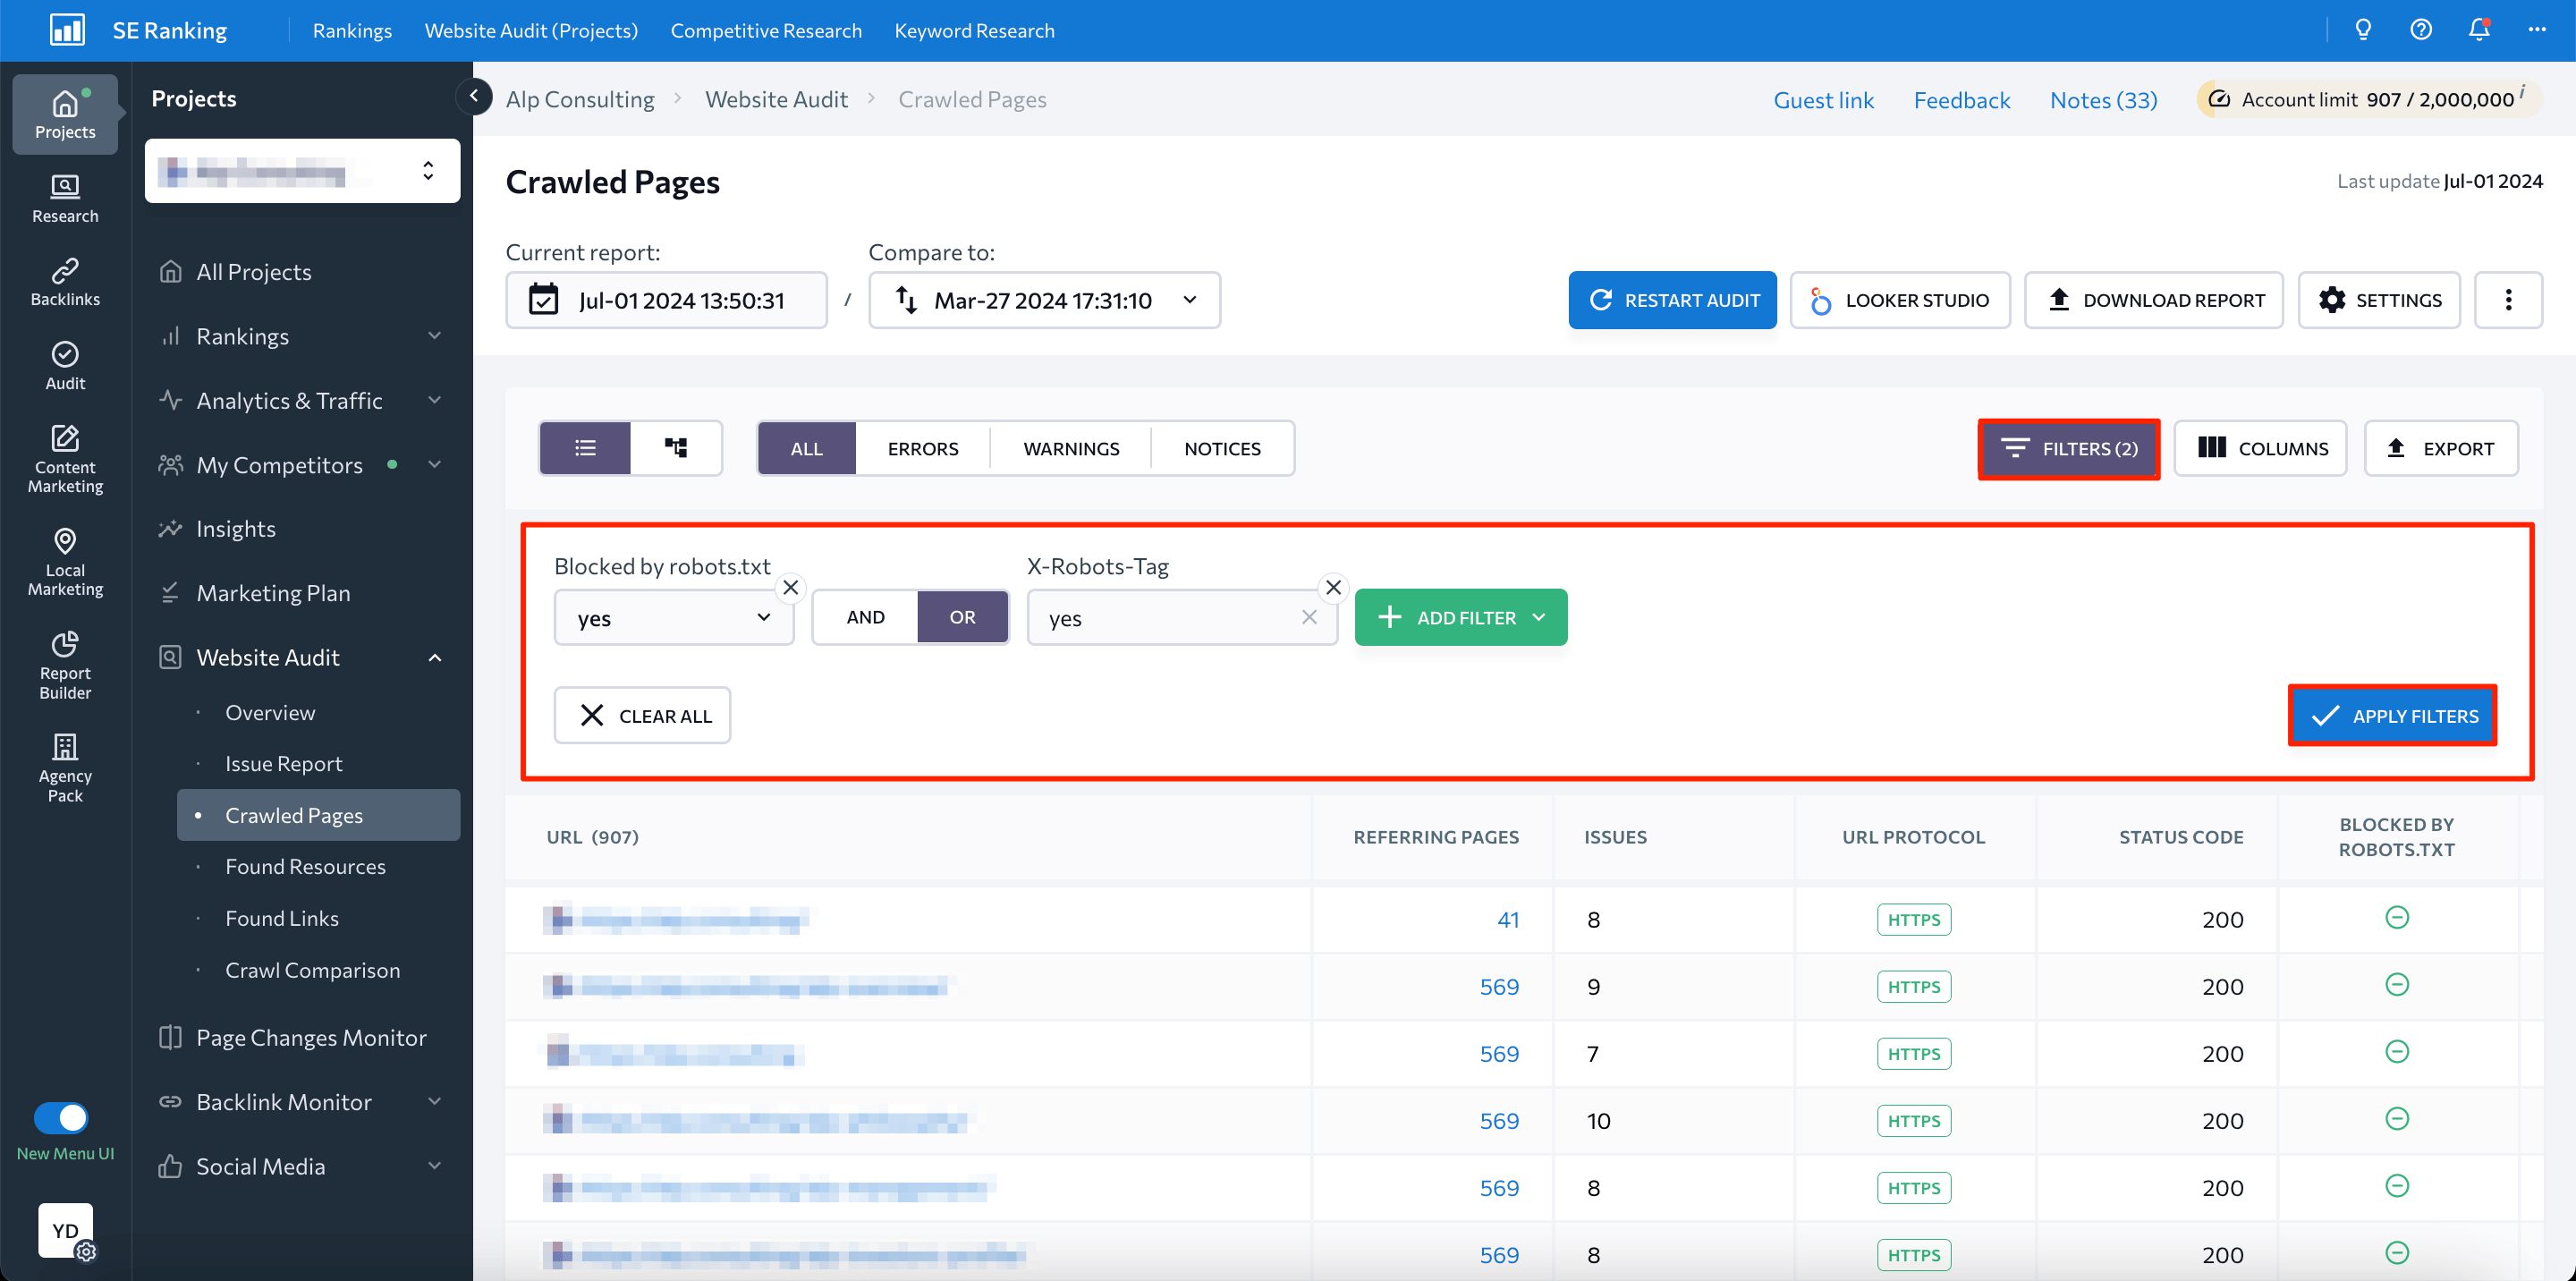 SE Ranking Crawled Pages filtering